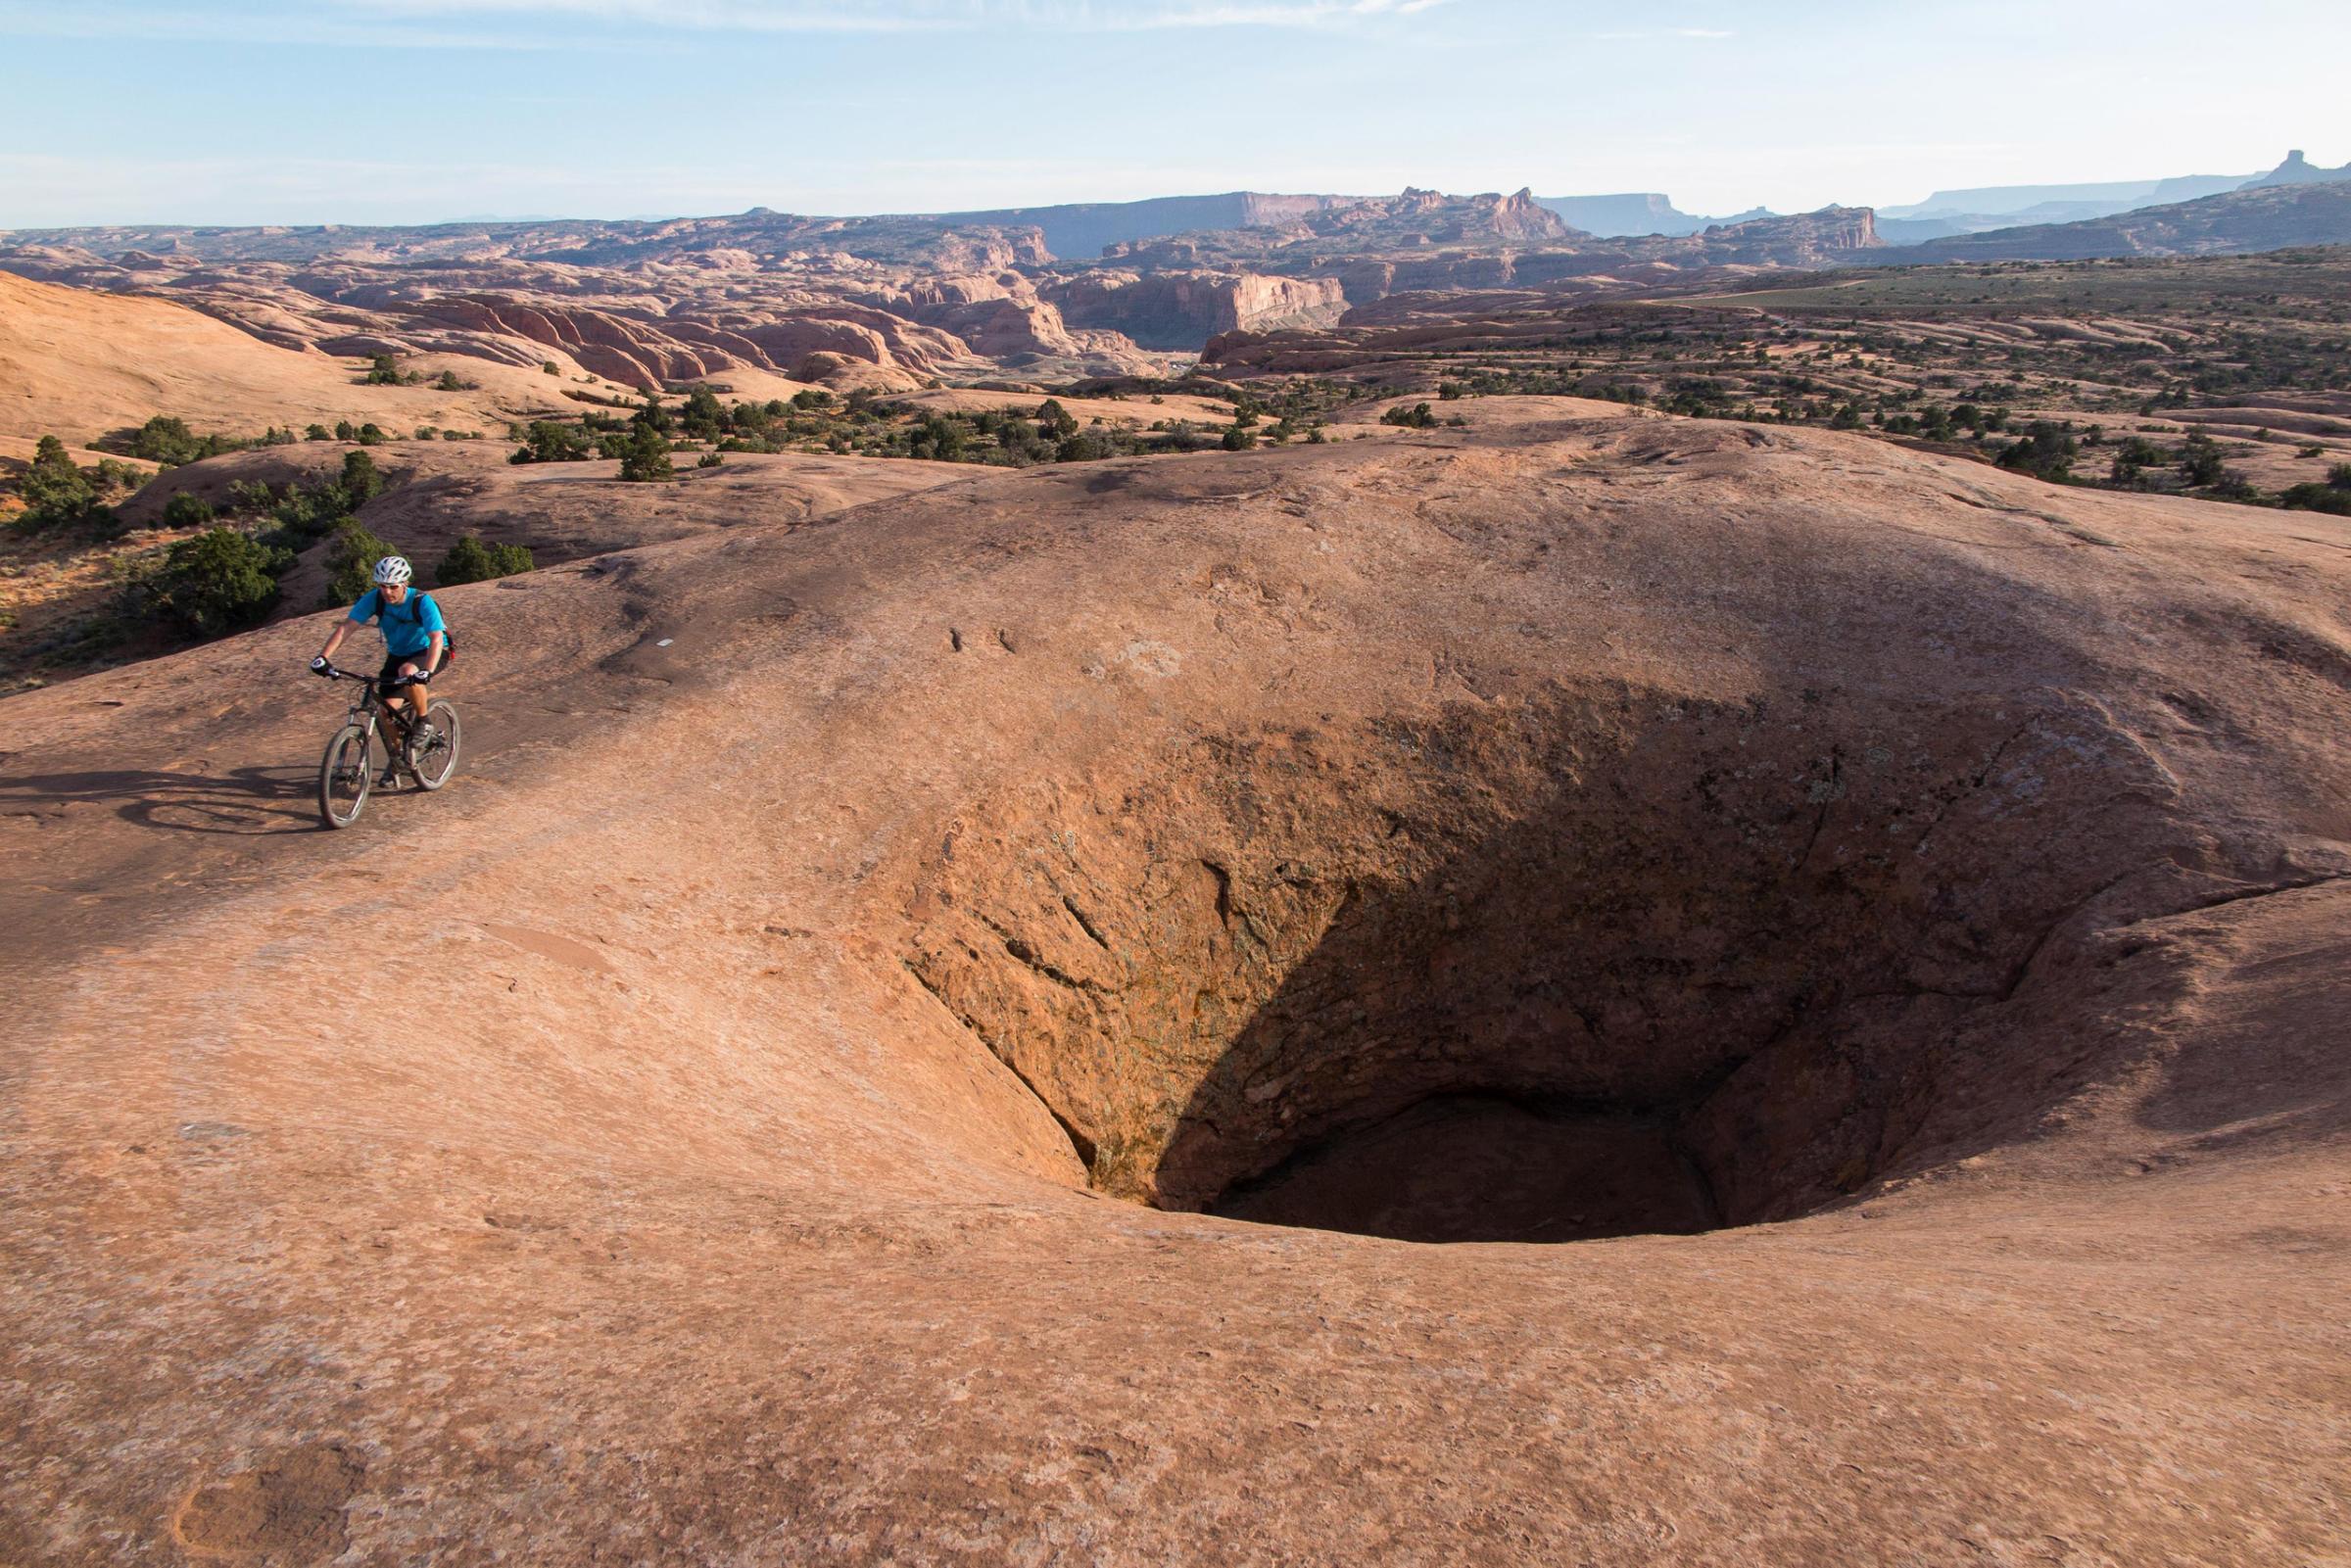 04 Apr 2015, Moab, Utah, USA --- Apr 5, 2015 - Moab, Utah, U.S. - Mountain biker TIM LANE rides past a giant wind blown bore hole in the rock on the red slickrock sandstone of Poison Spider trail. The Poison Spider Mesa trail is one of the ''Must Do'' rides of Moab. Combining physically demanding biking challenges with great views, this trail is for expert bikers. The trail can be ridden as an out-and-back, or a 13-mile loop that includes the infamous Portal Trail as the return-route off the mesa. (Credit Image: ¬© Ruaridh Stewart/ZUMA Wire/ZUMA Press) --- Image by © Ruaridh Stewart/ZUMA Press/Corbis